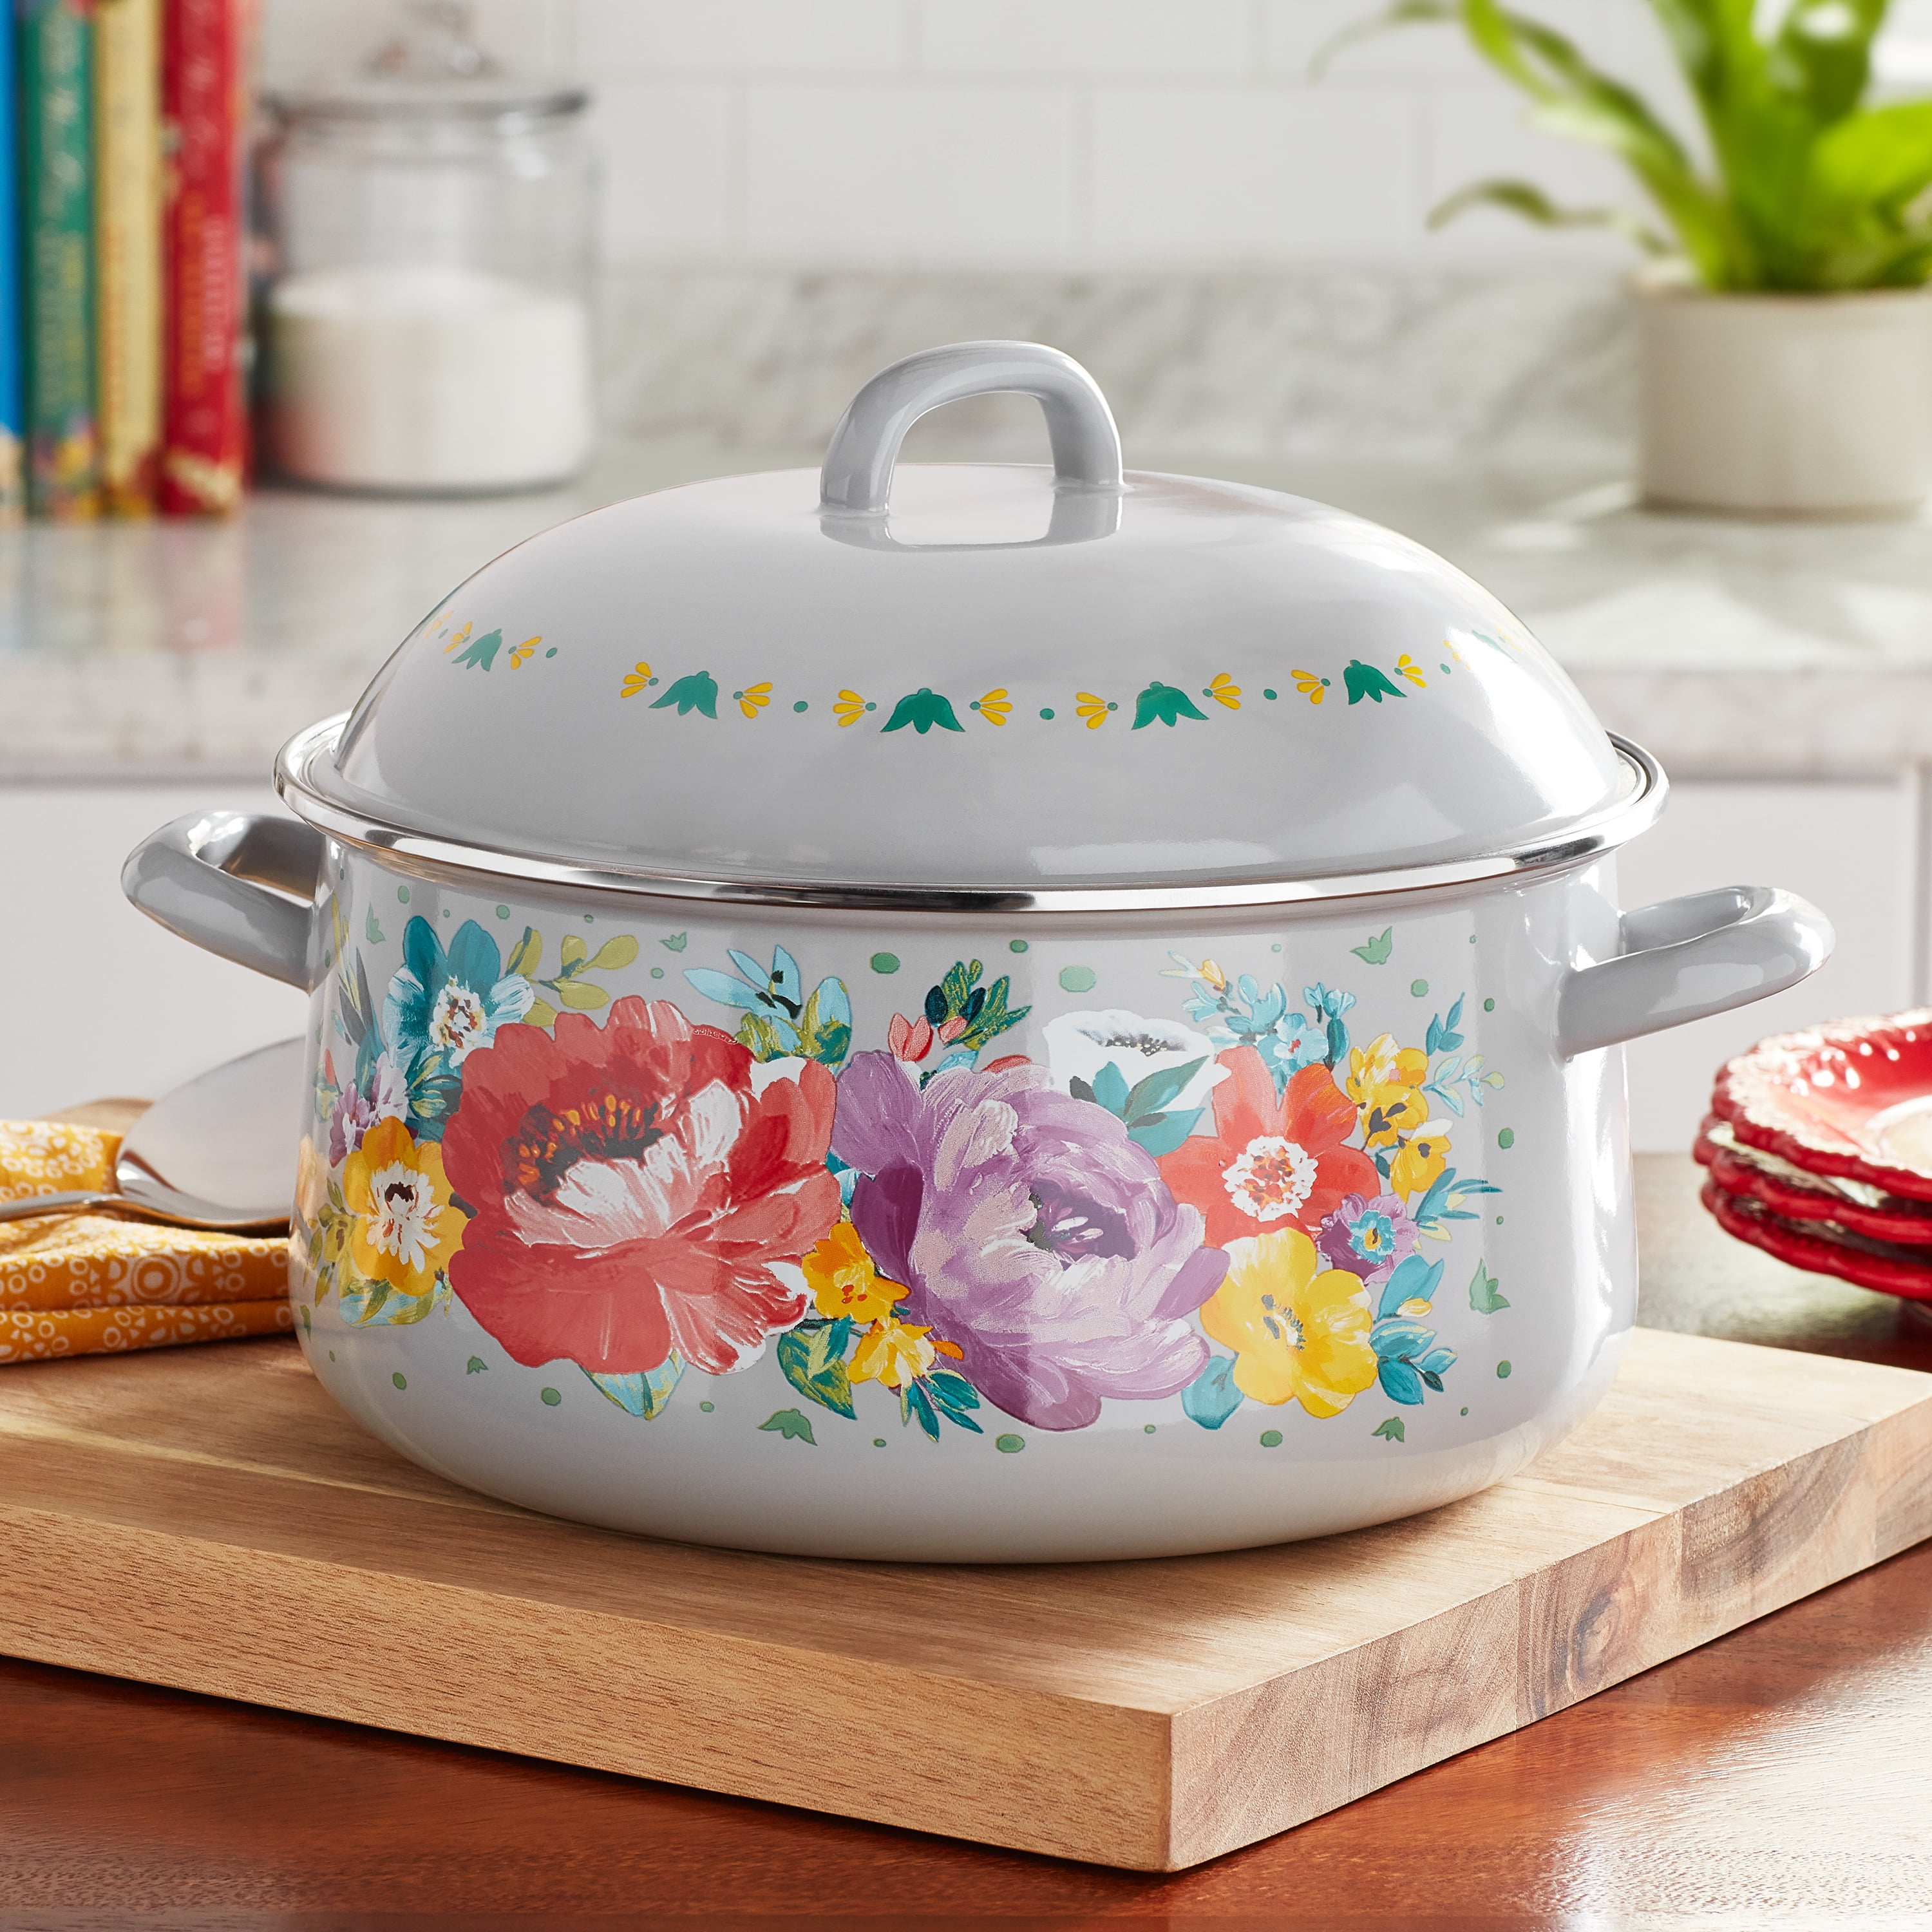 The Pioneer Woman Breezy Blossom Enamel on Steel Dutch Oven with Lid 🌸  Capacity: 4 Quart / 3.78 L Made of Enameled Steel Hand Wash…